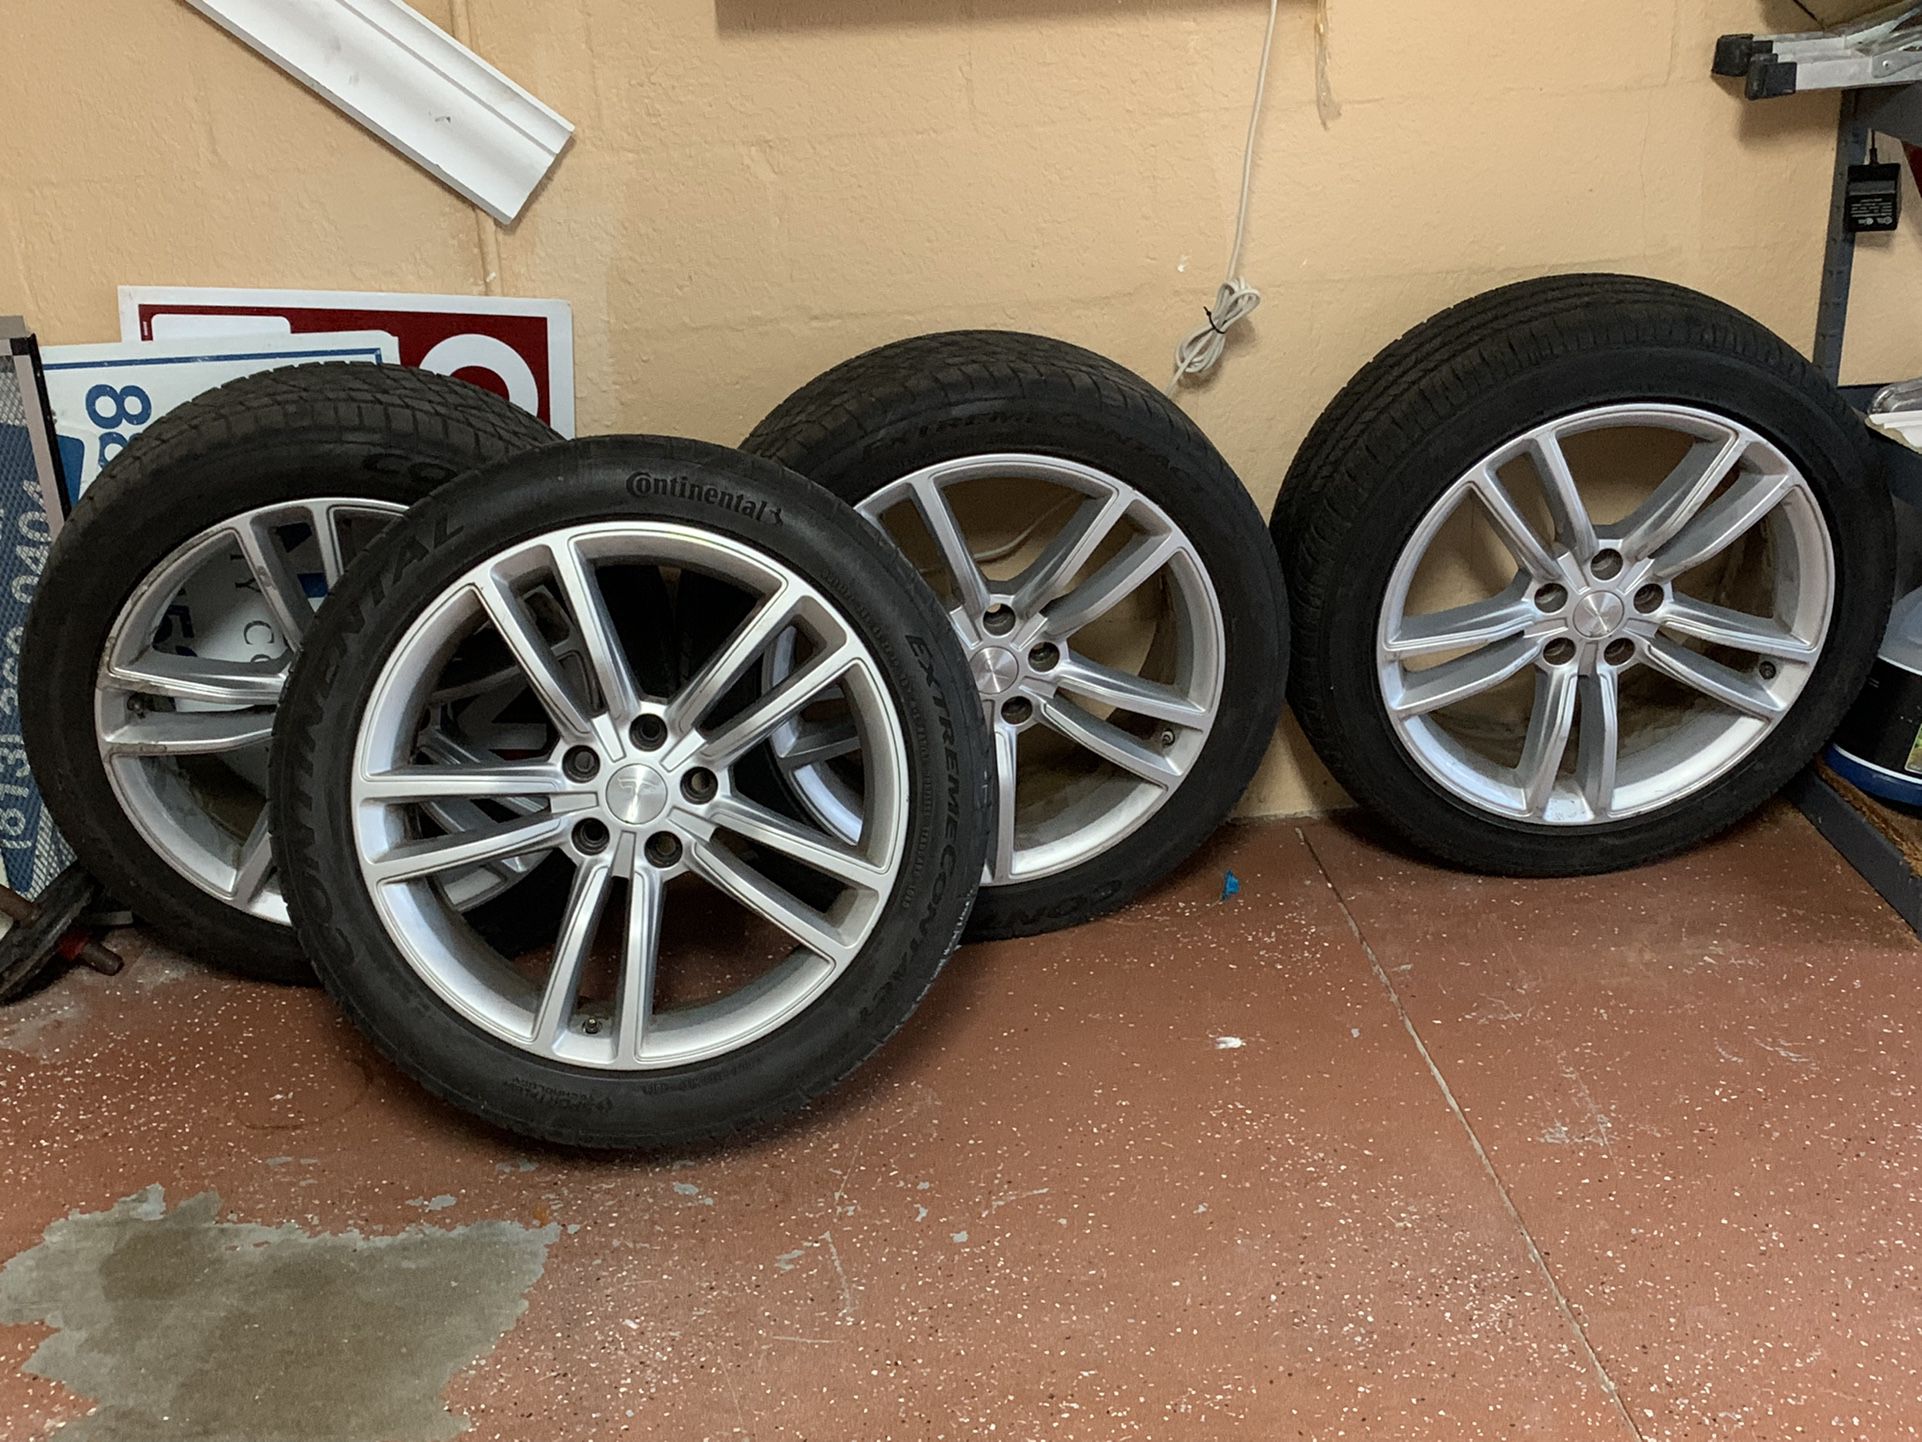 Tesla Model S (2012-2017) 19” OEM Double Spoke Rims and tires - Part# (contact info removed)-00-D